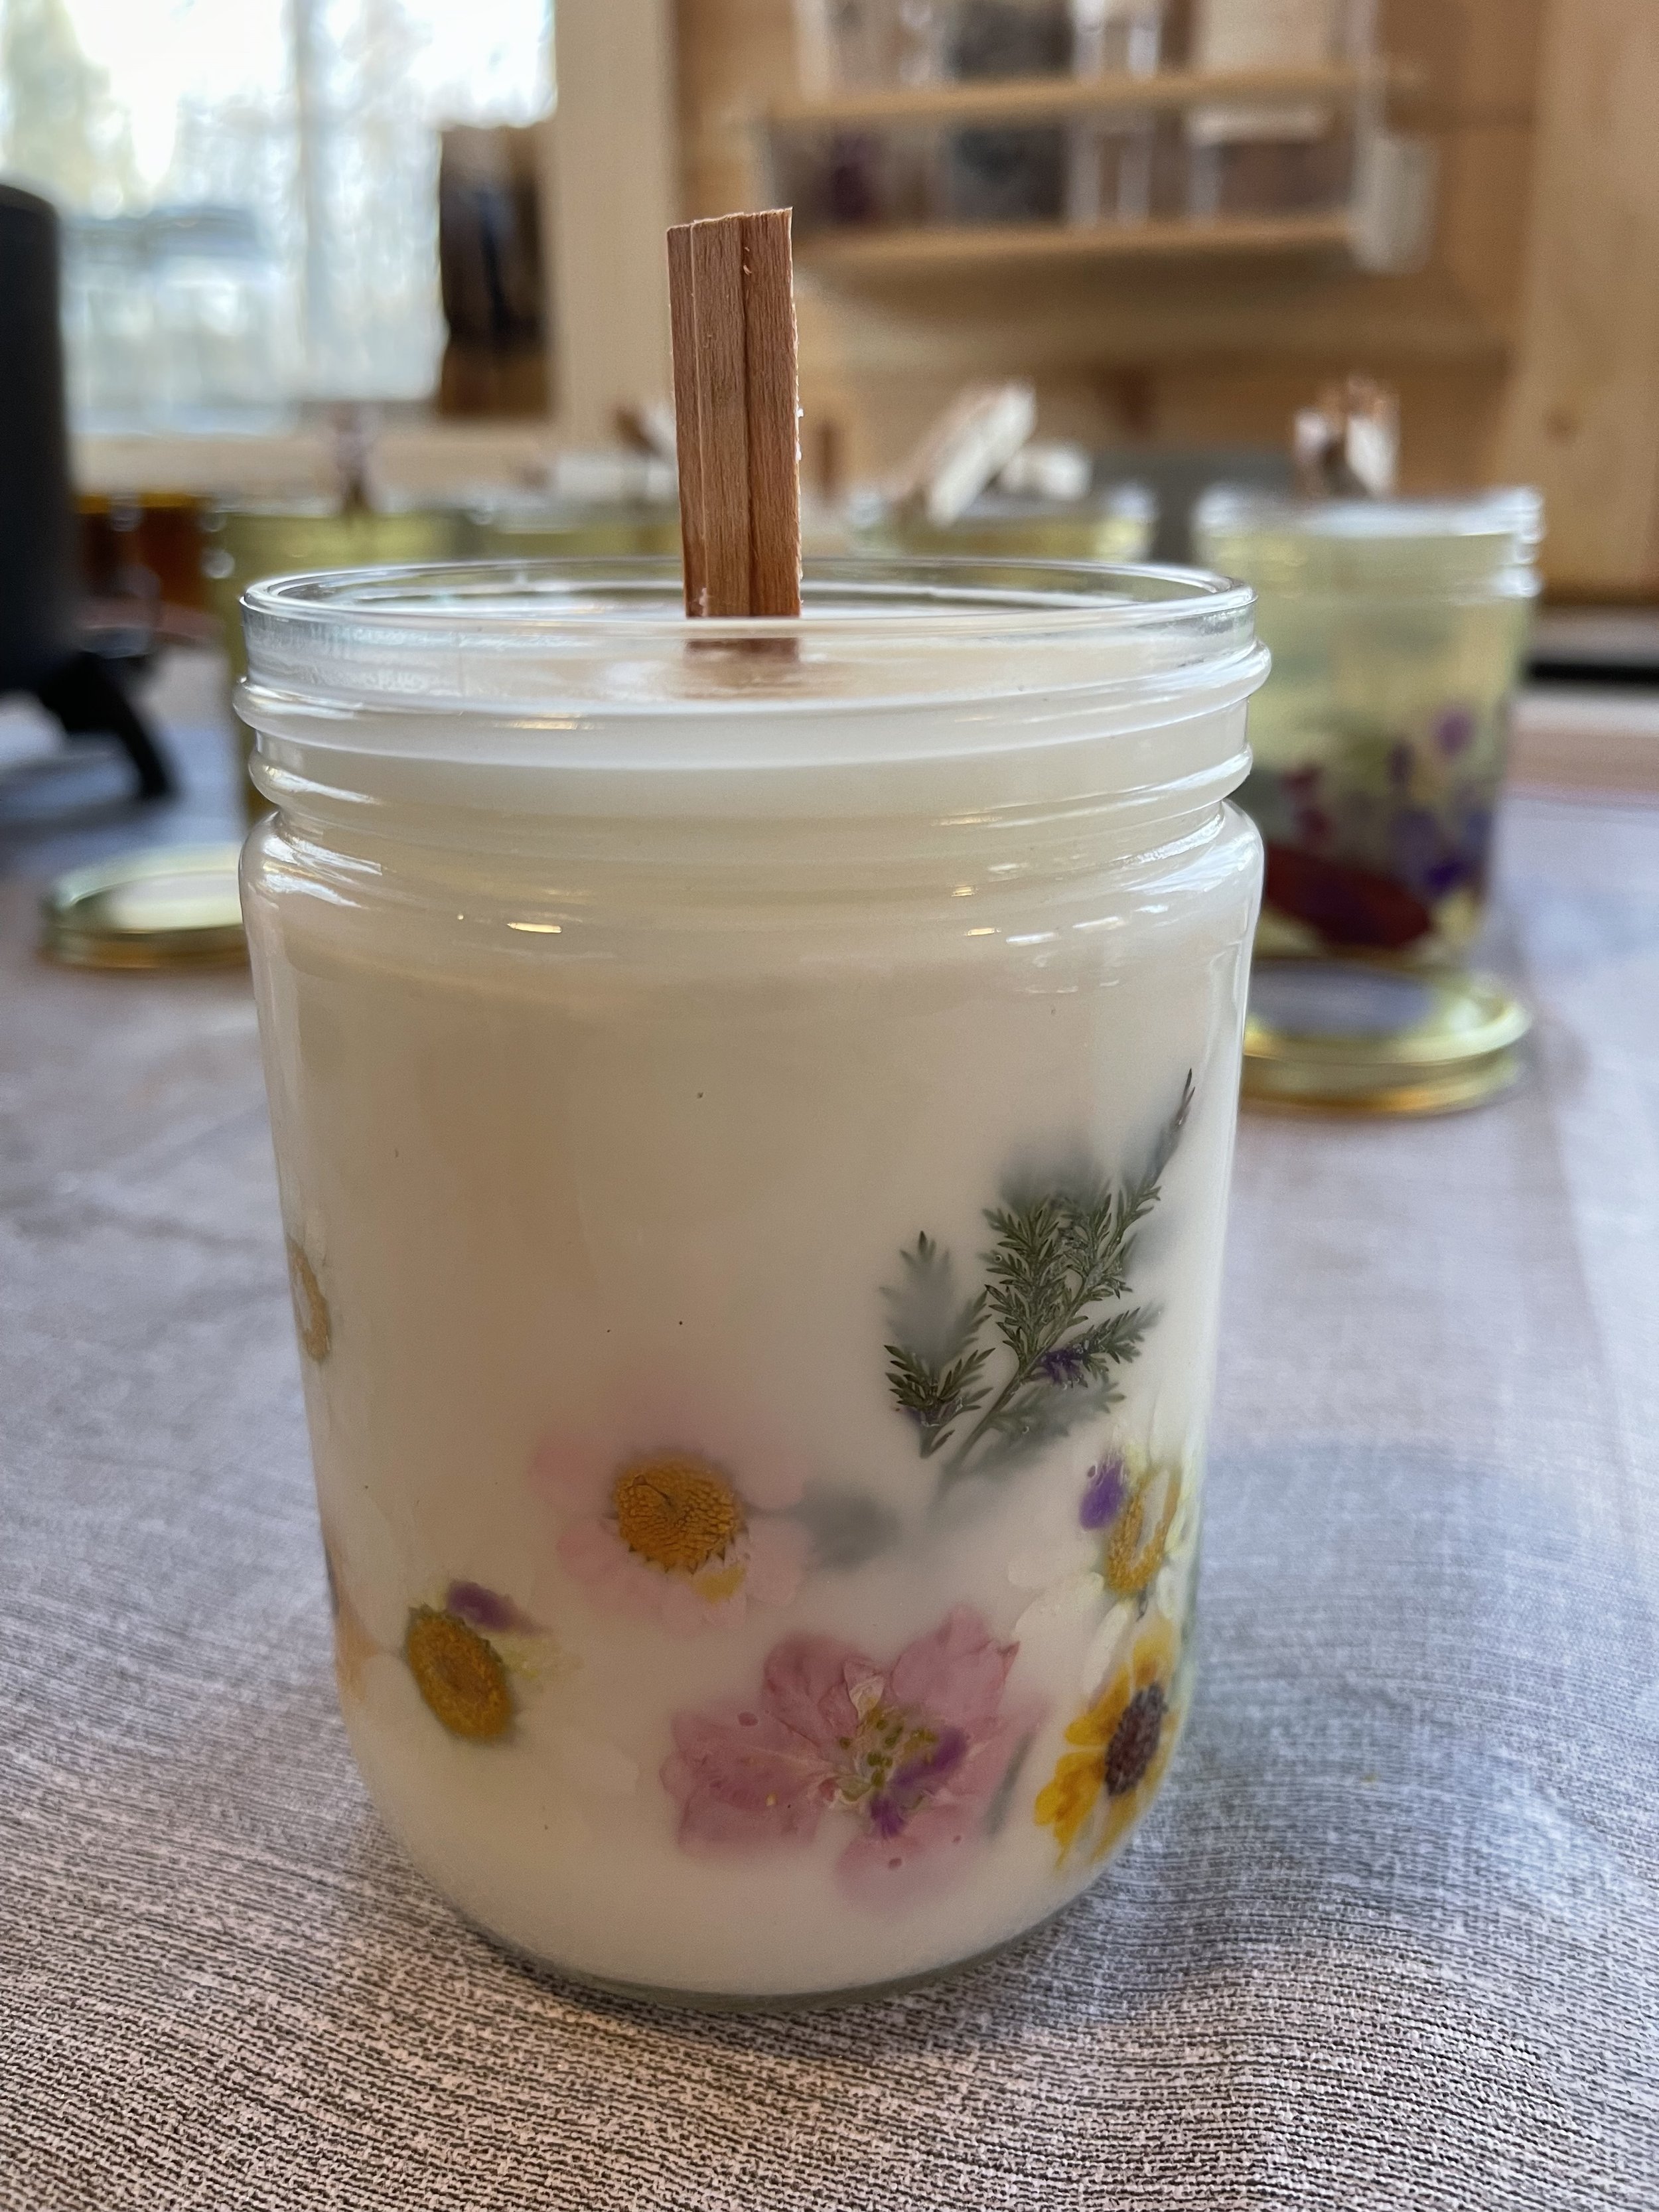  Pressed flower candles that ship for free to the US. Adding